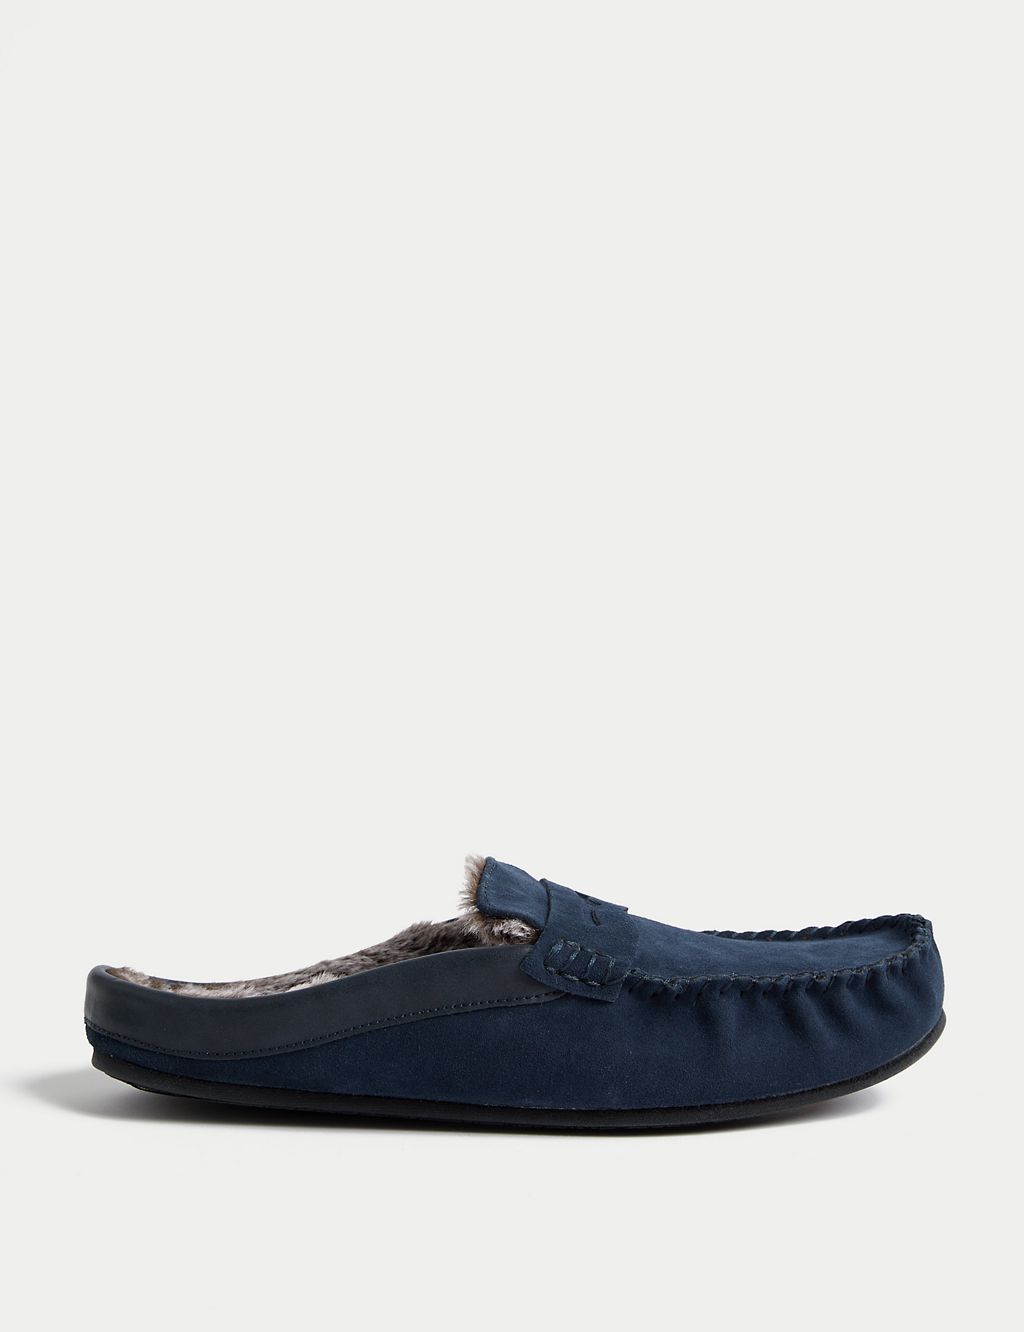 Suede Mule Moccasins 3 of 4